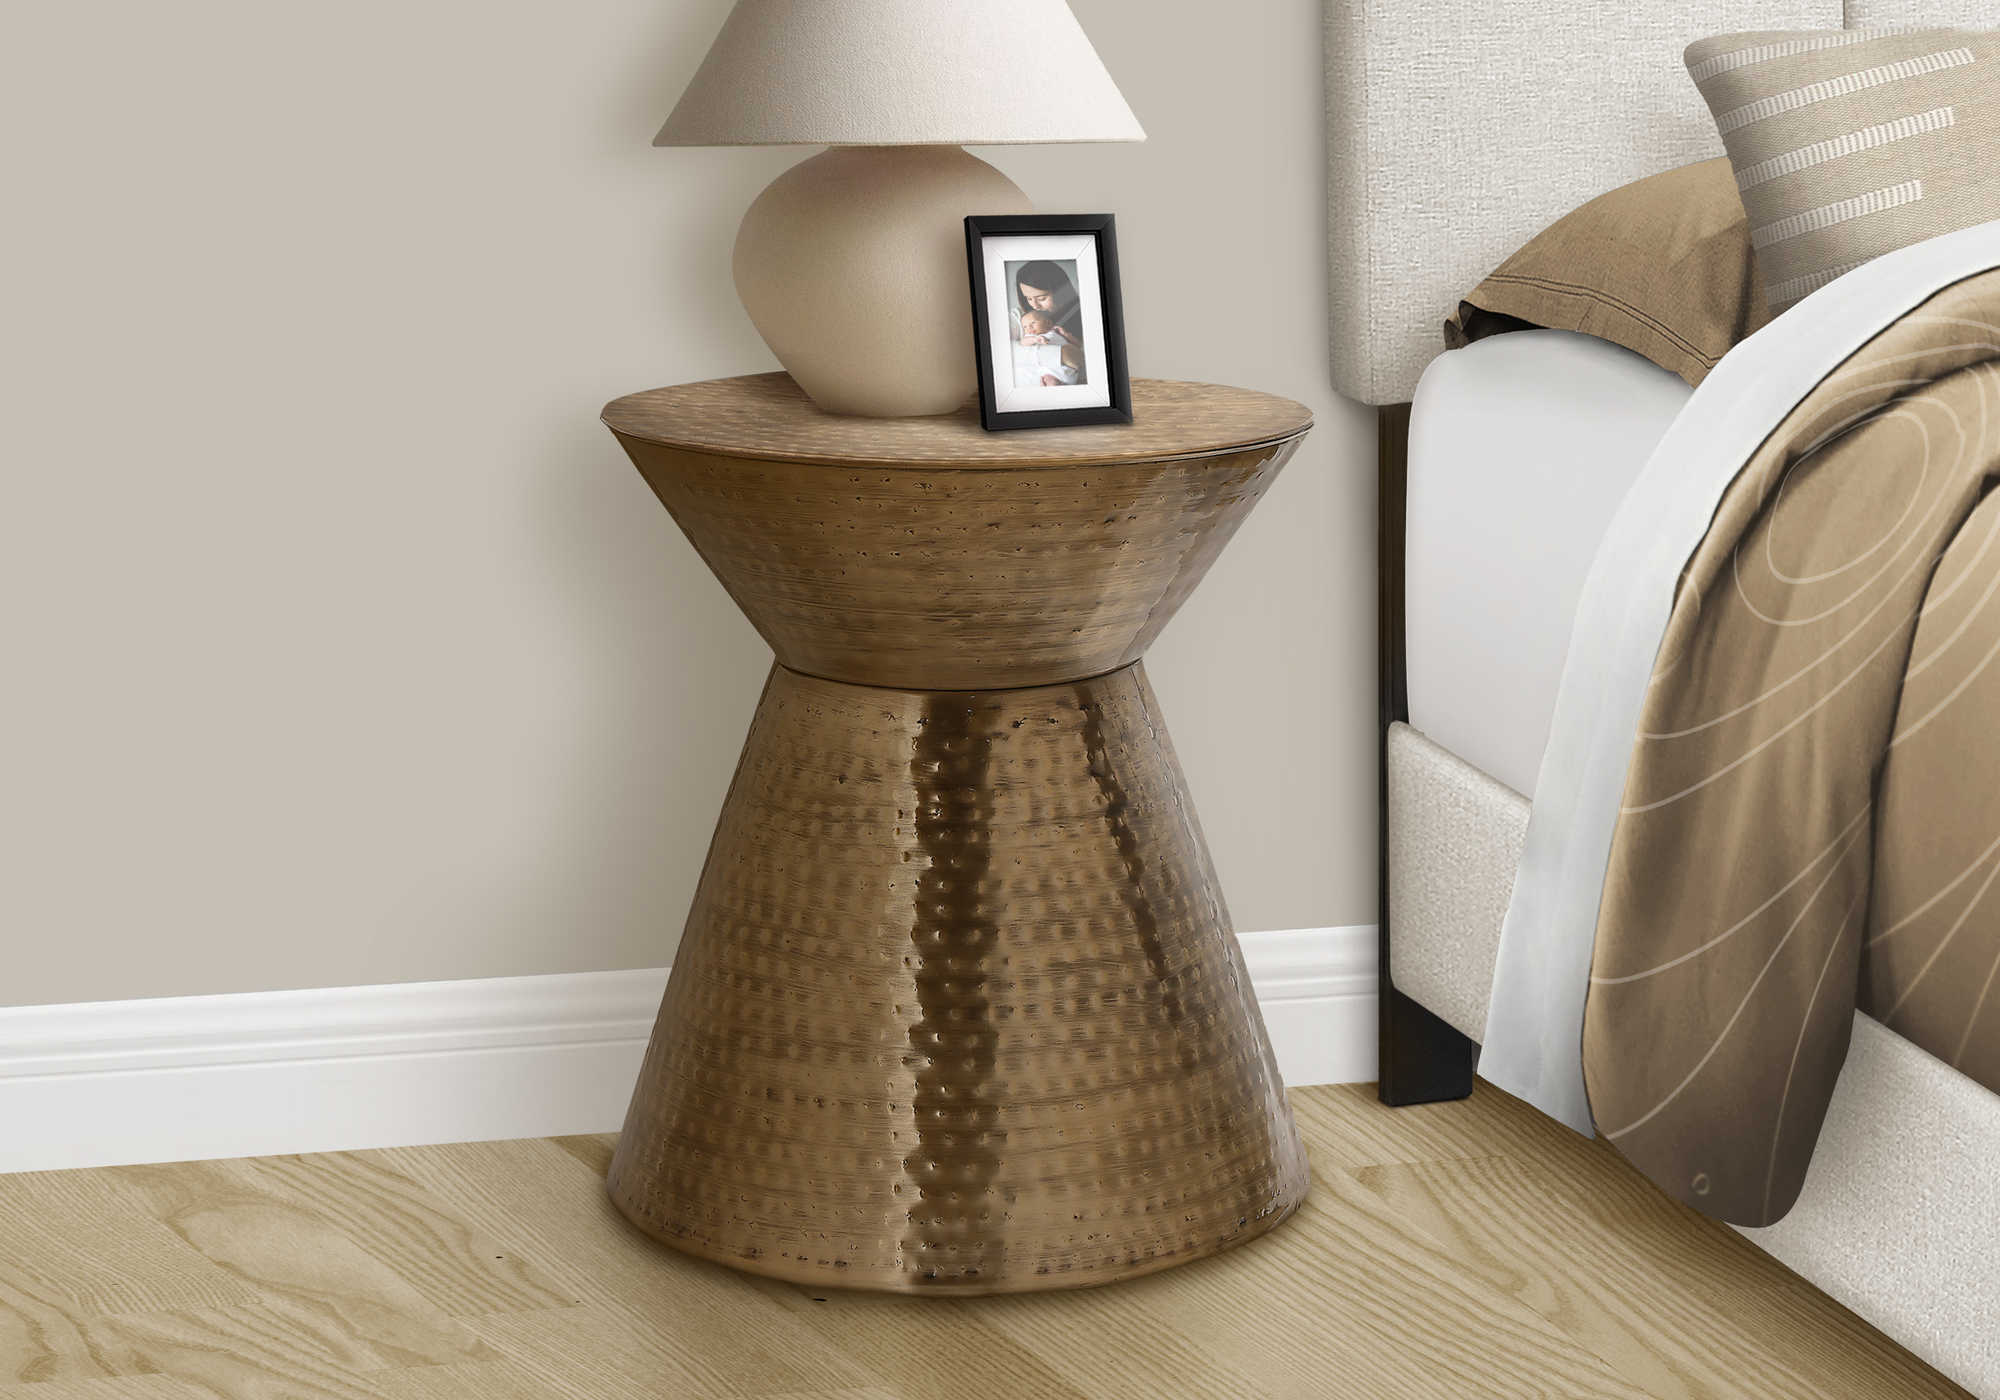 NIGHTSTAND - 22"H / COPPER IRON METAL DRUM END TABLE